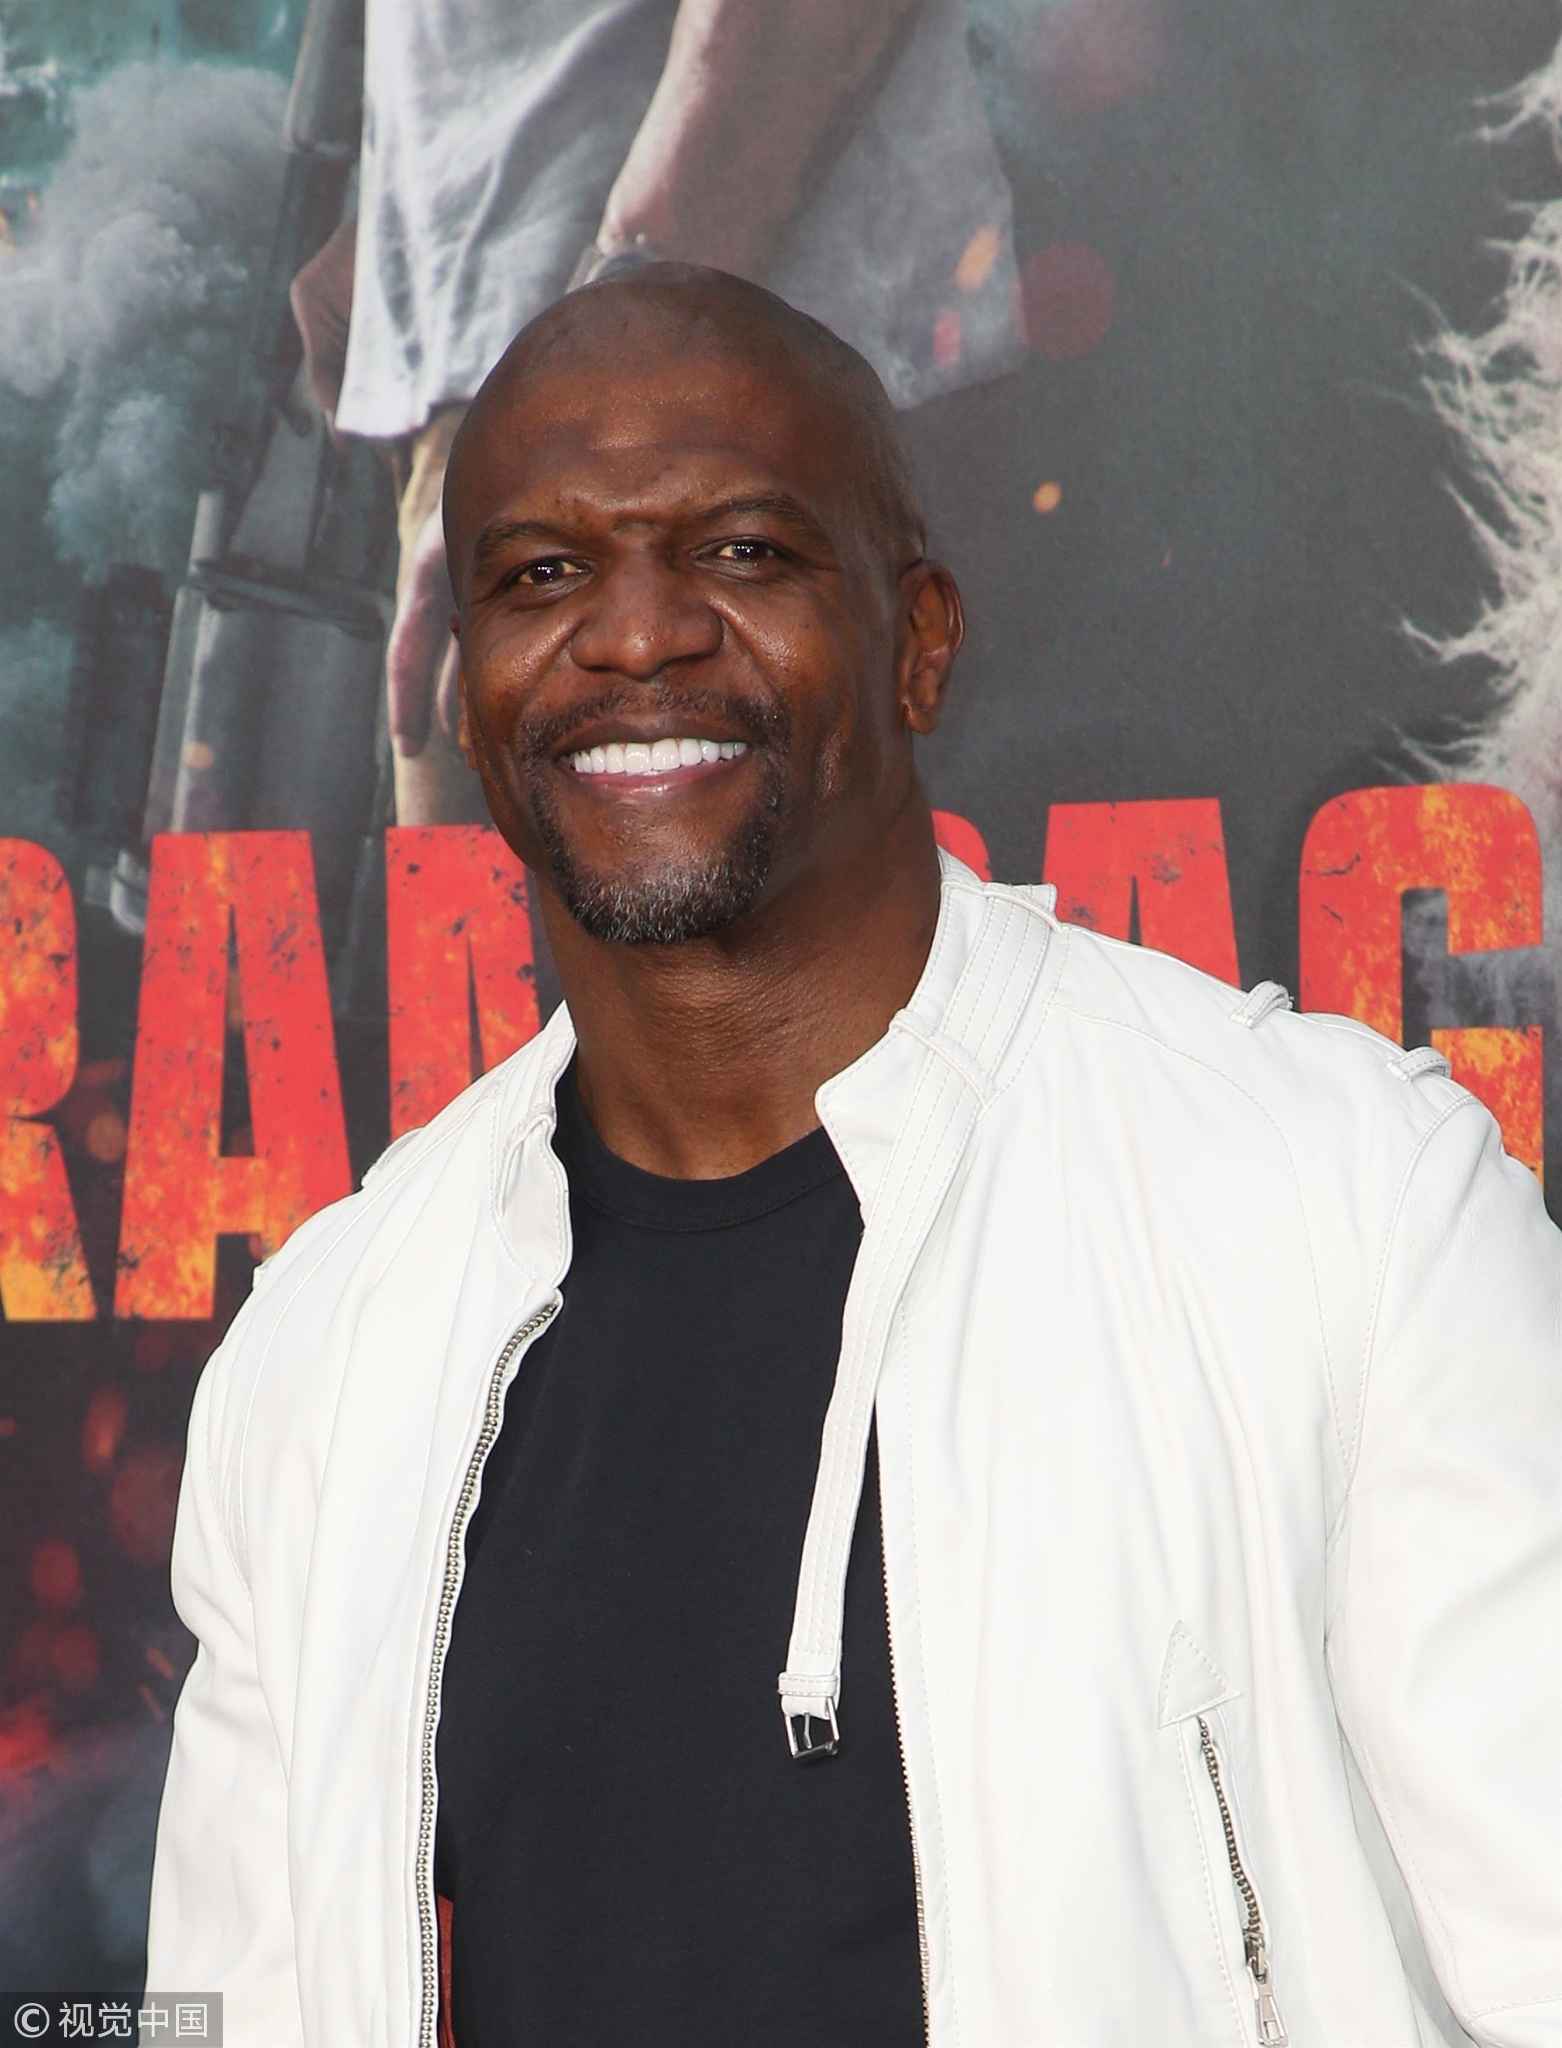 Terry Crews says producer threatened 'trouble' over lawsuit - CGTN